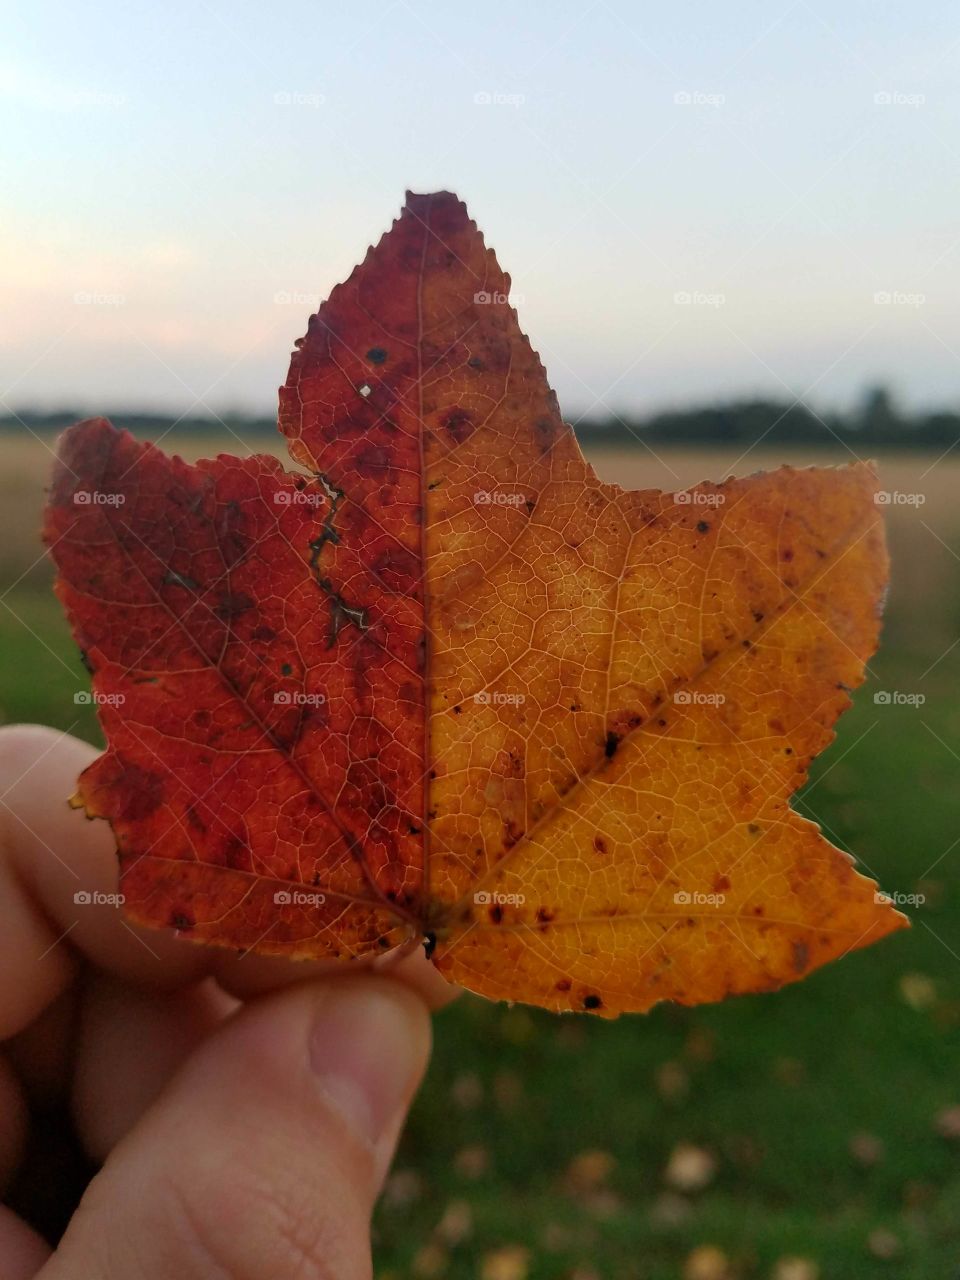 Indecisive Leaf - Nothing captures the sign of summers end like this leaf, split between the tell-tale red of a new season in the making, and the fade-to-yellow conclusion of a warm summer